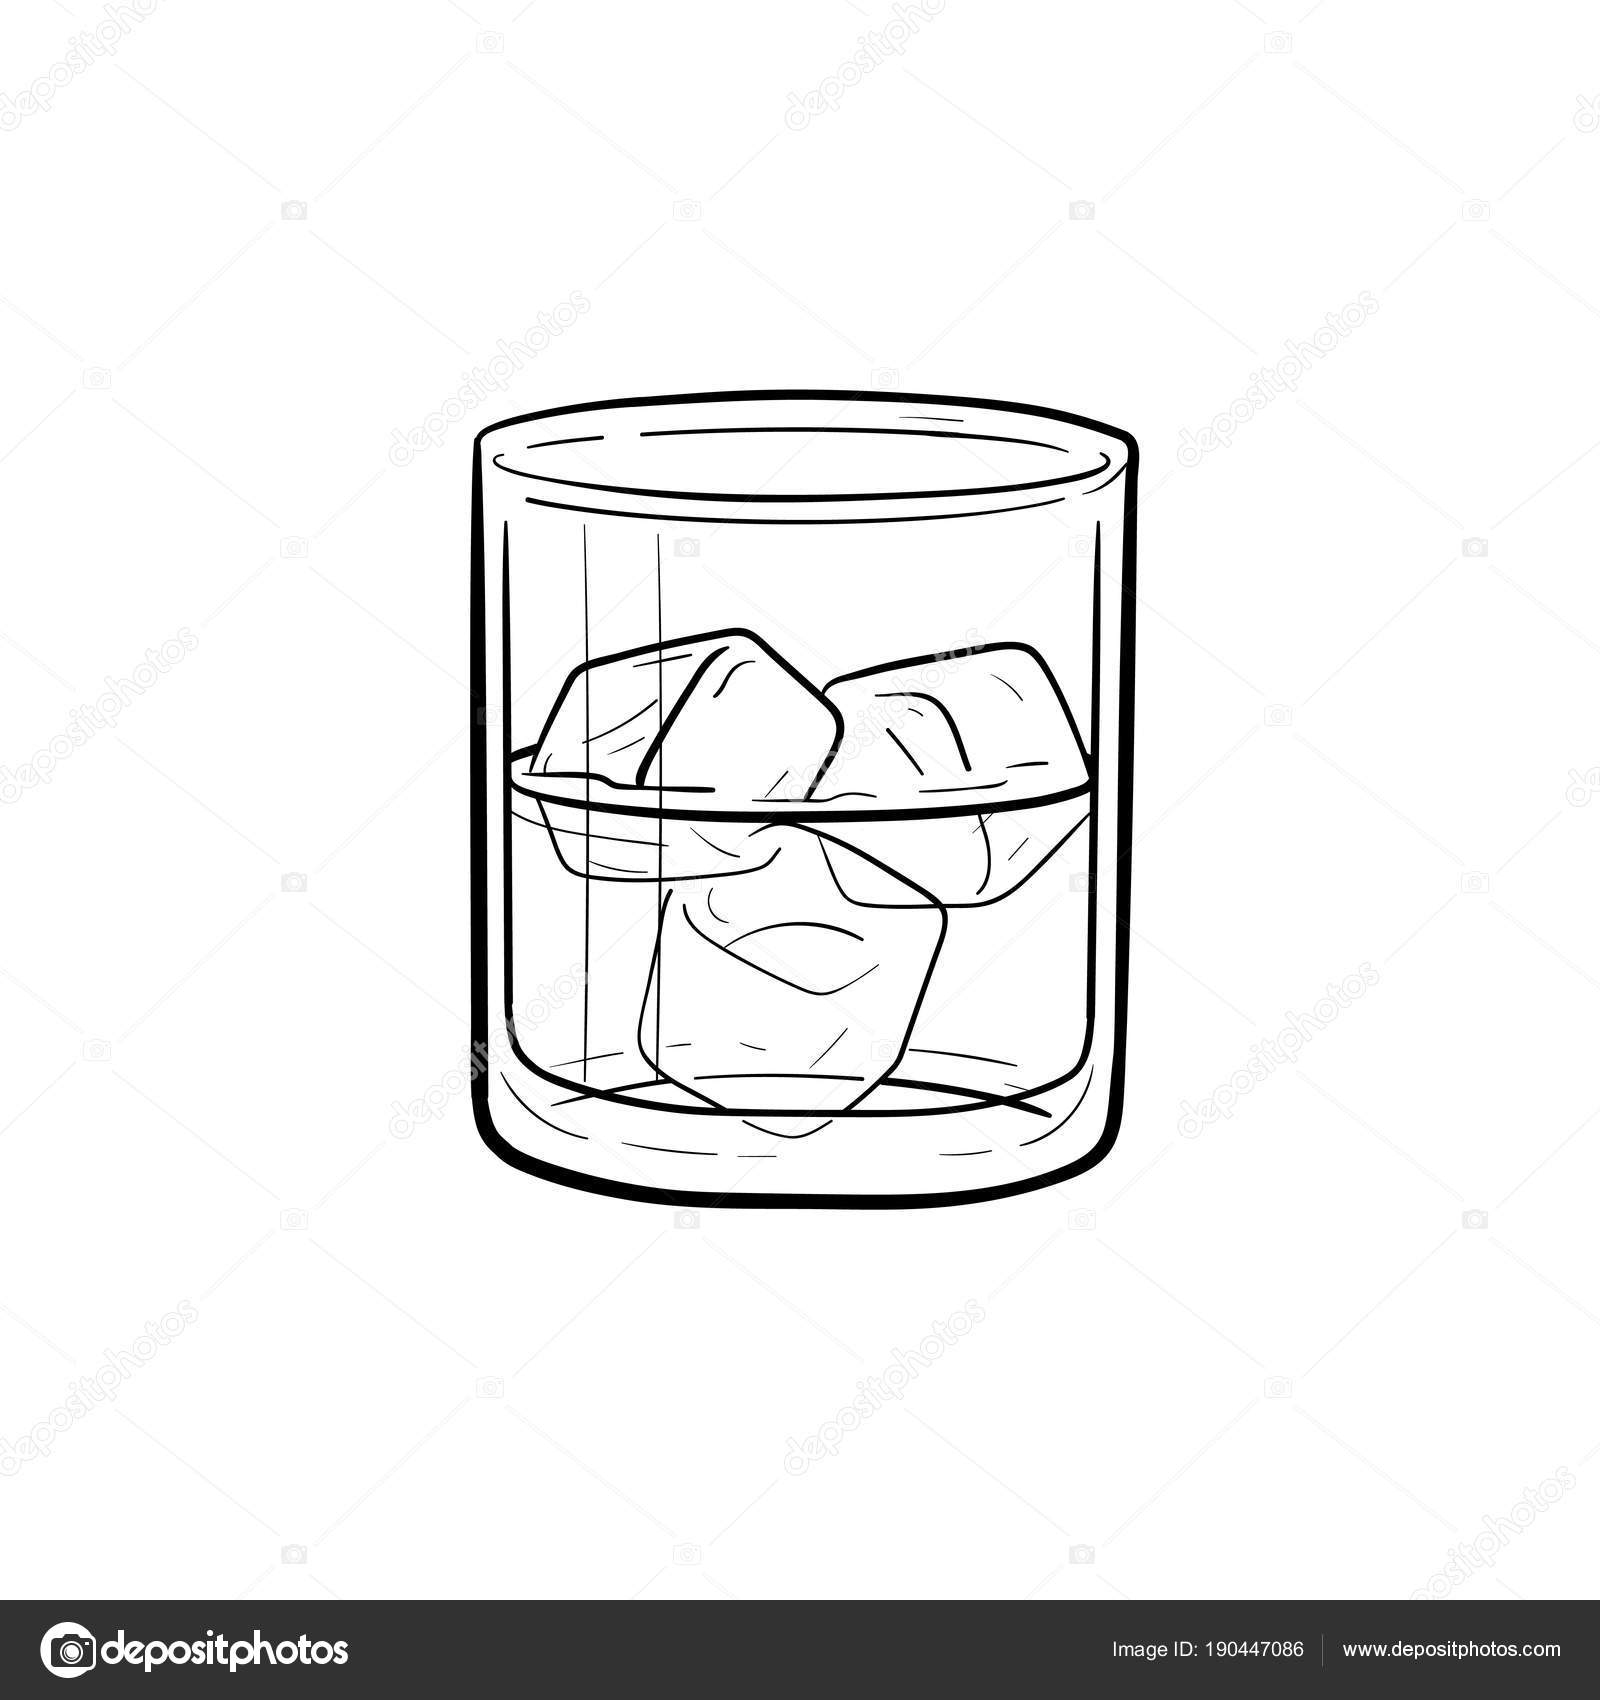 Glass water with ice cubes Royalty Free Vector Image